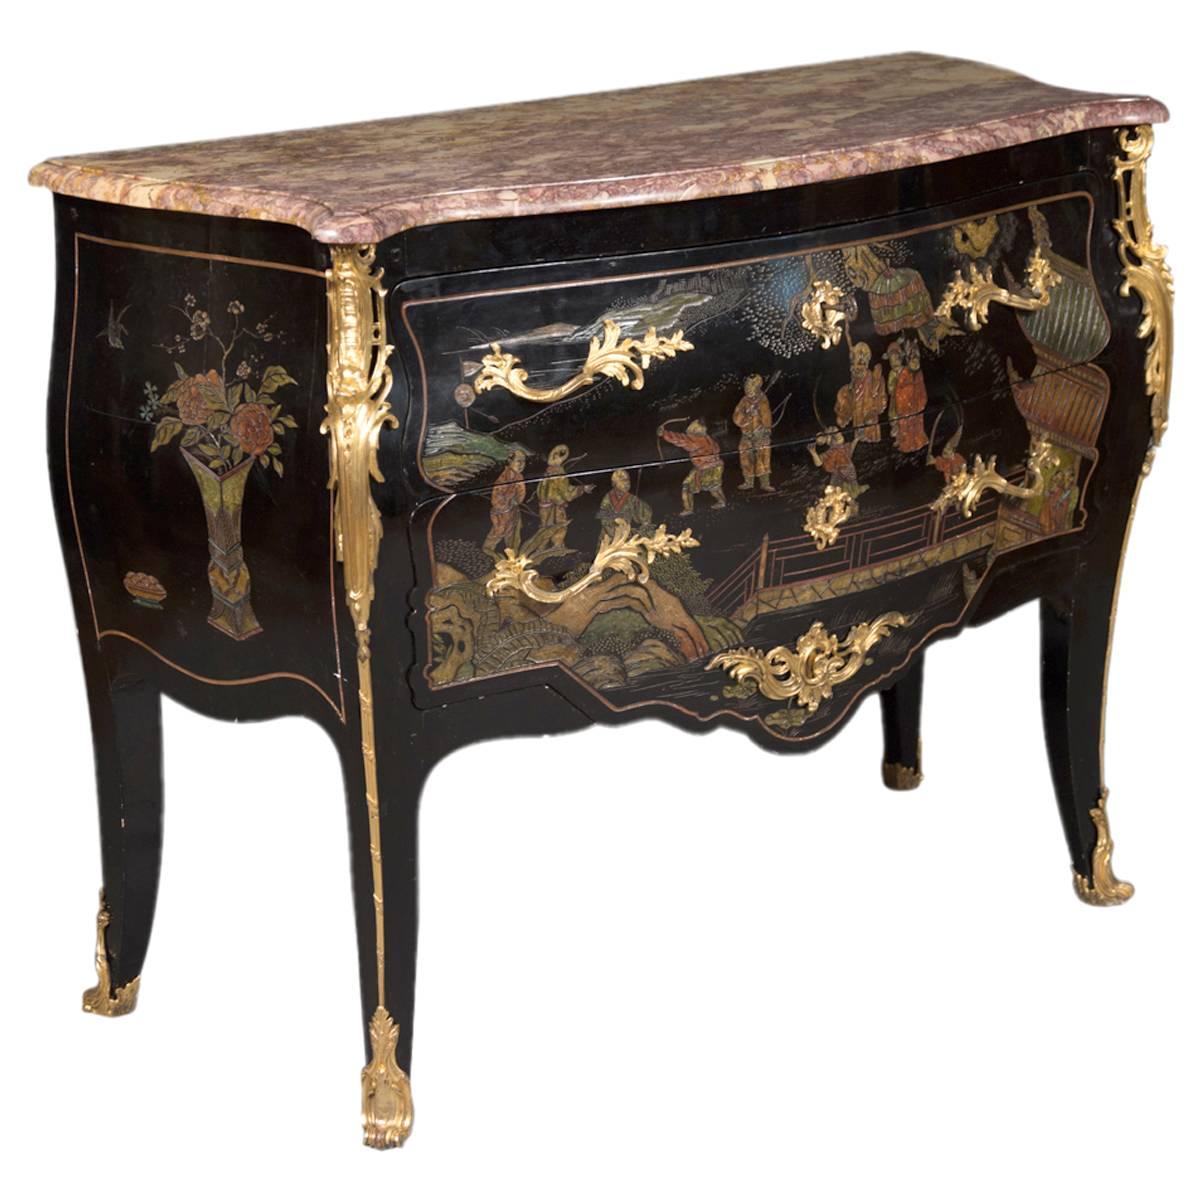 French Antique Louis XV Style Gilt Bronze Mounted Chinoiserie Commode